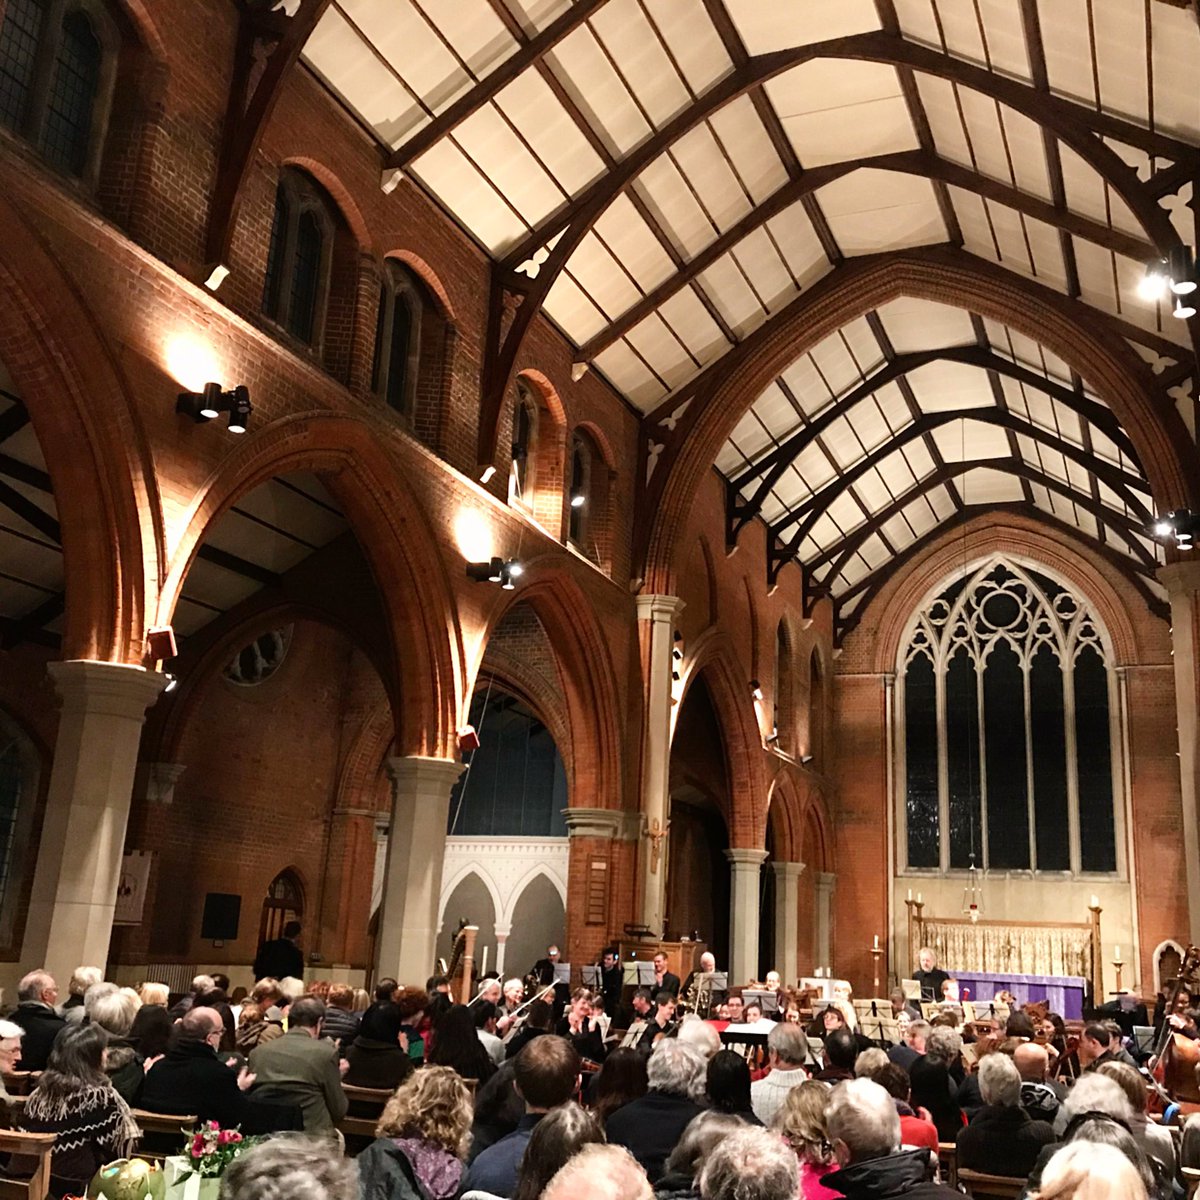 Our base this year is St Andrew’s Church on Alexandra Park Road. 🗓 Join us in July for:

🌟 Bach concert Monday 8 @AmiciVoices
🎙 Jazz duo Friday 12 @ben_music
🎹 Piano recital & choral concert Saturday 13 @TobyHession @CambChorale 

bit.ly/2X9c30n

#mhmf19 #muswellhill